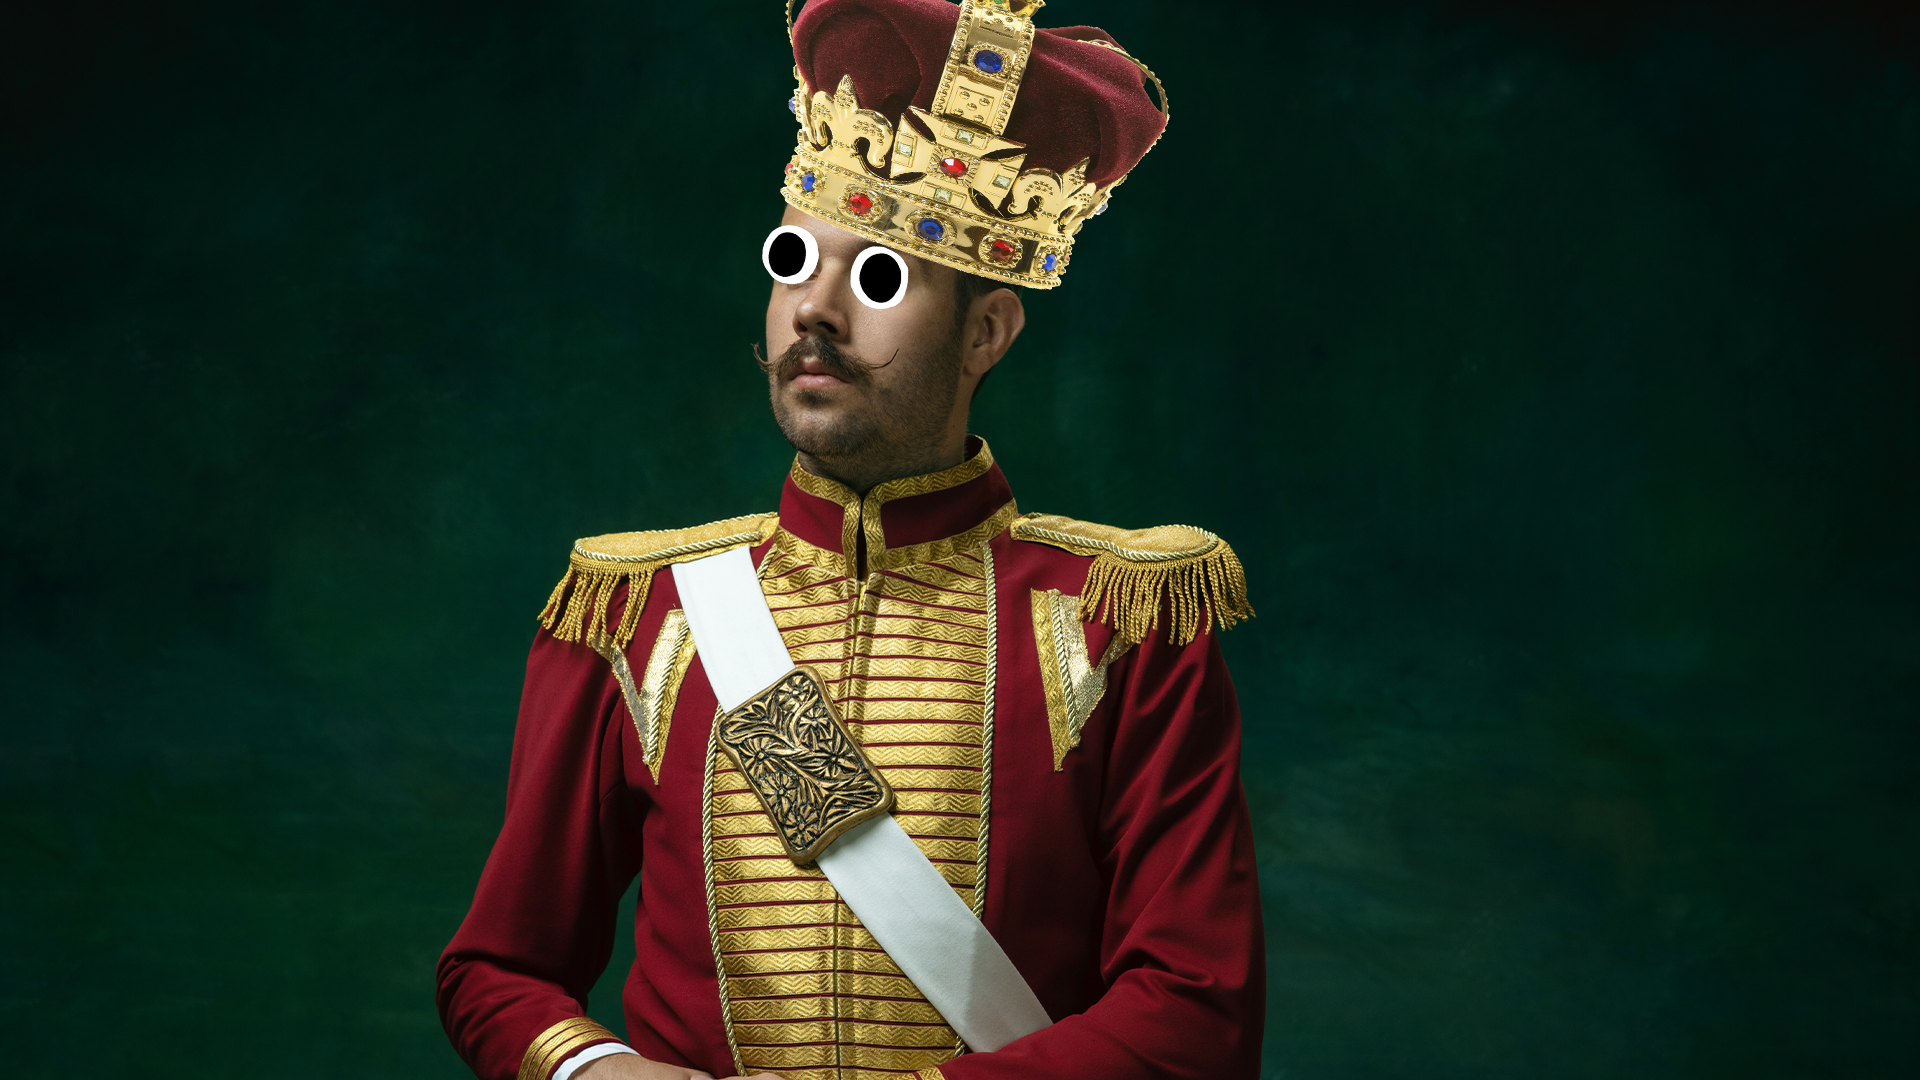 King with crown on dark background 